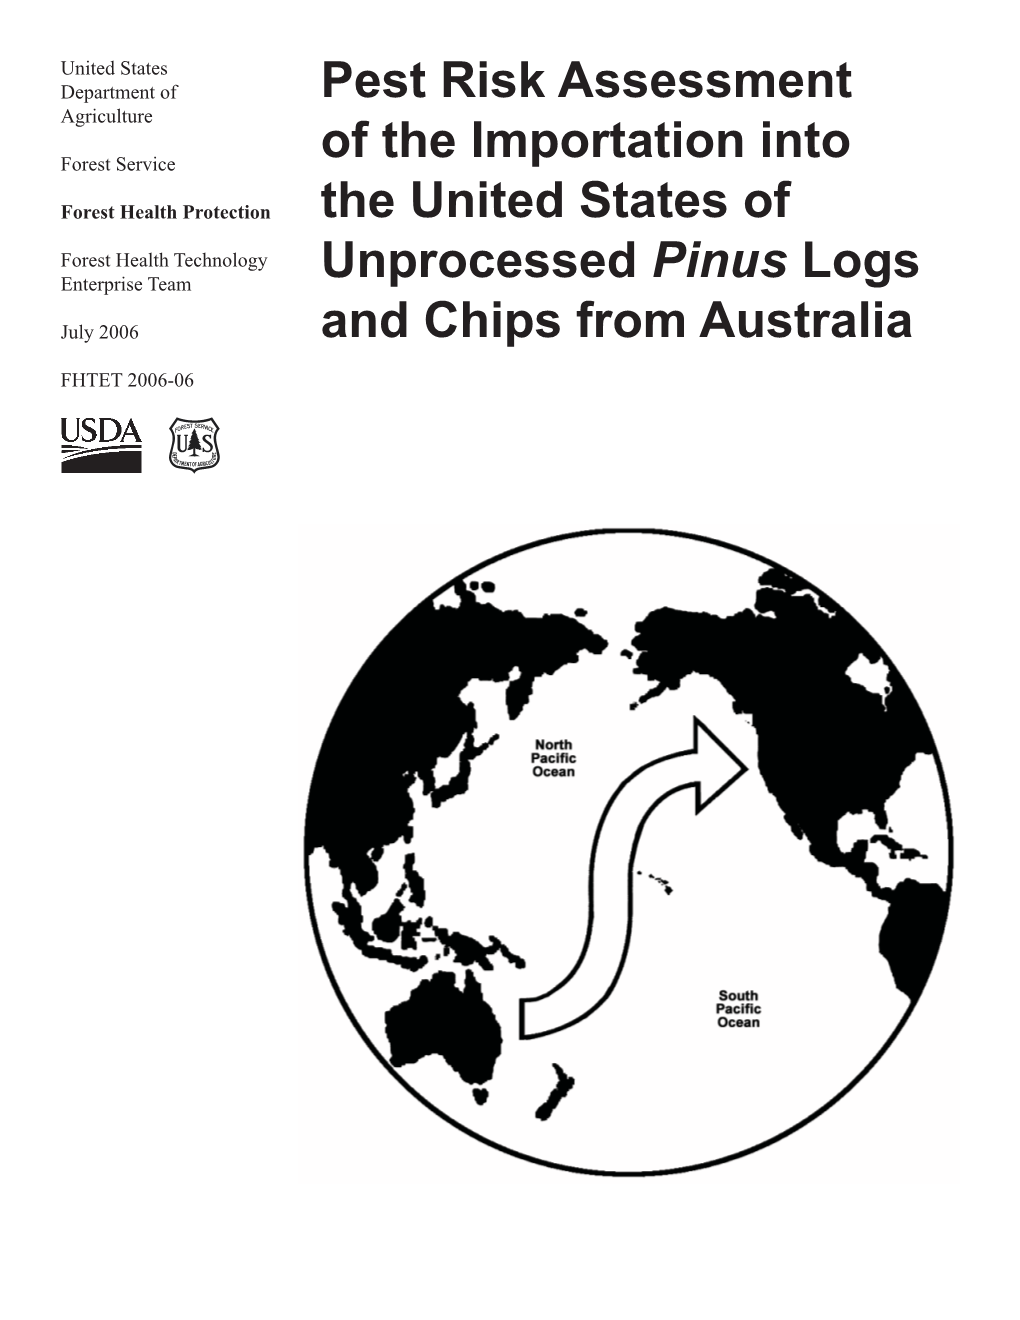 Pest Risk Assessment of the Importation Into the United States of Unprocessed Pinus Logs and Chips from Australia